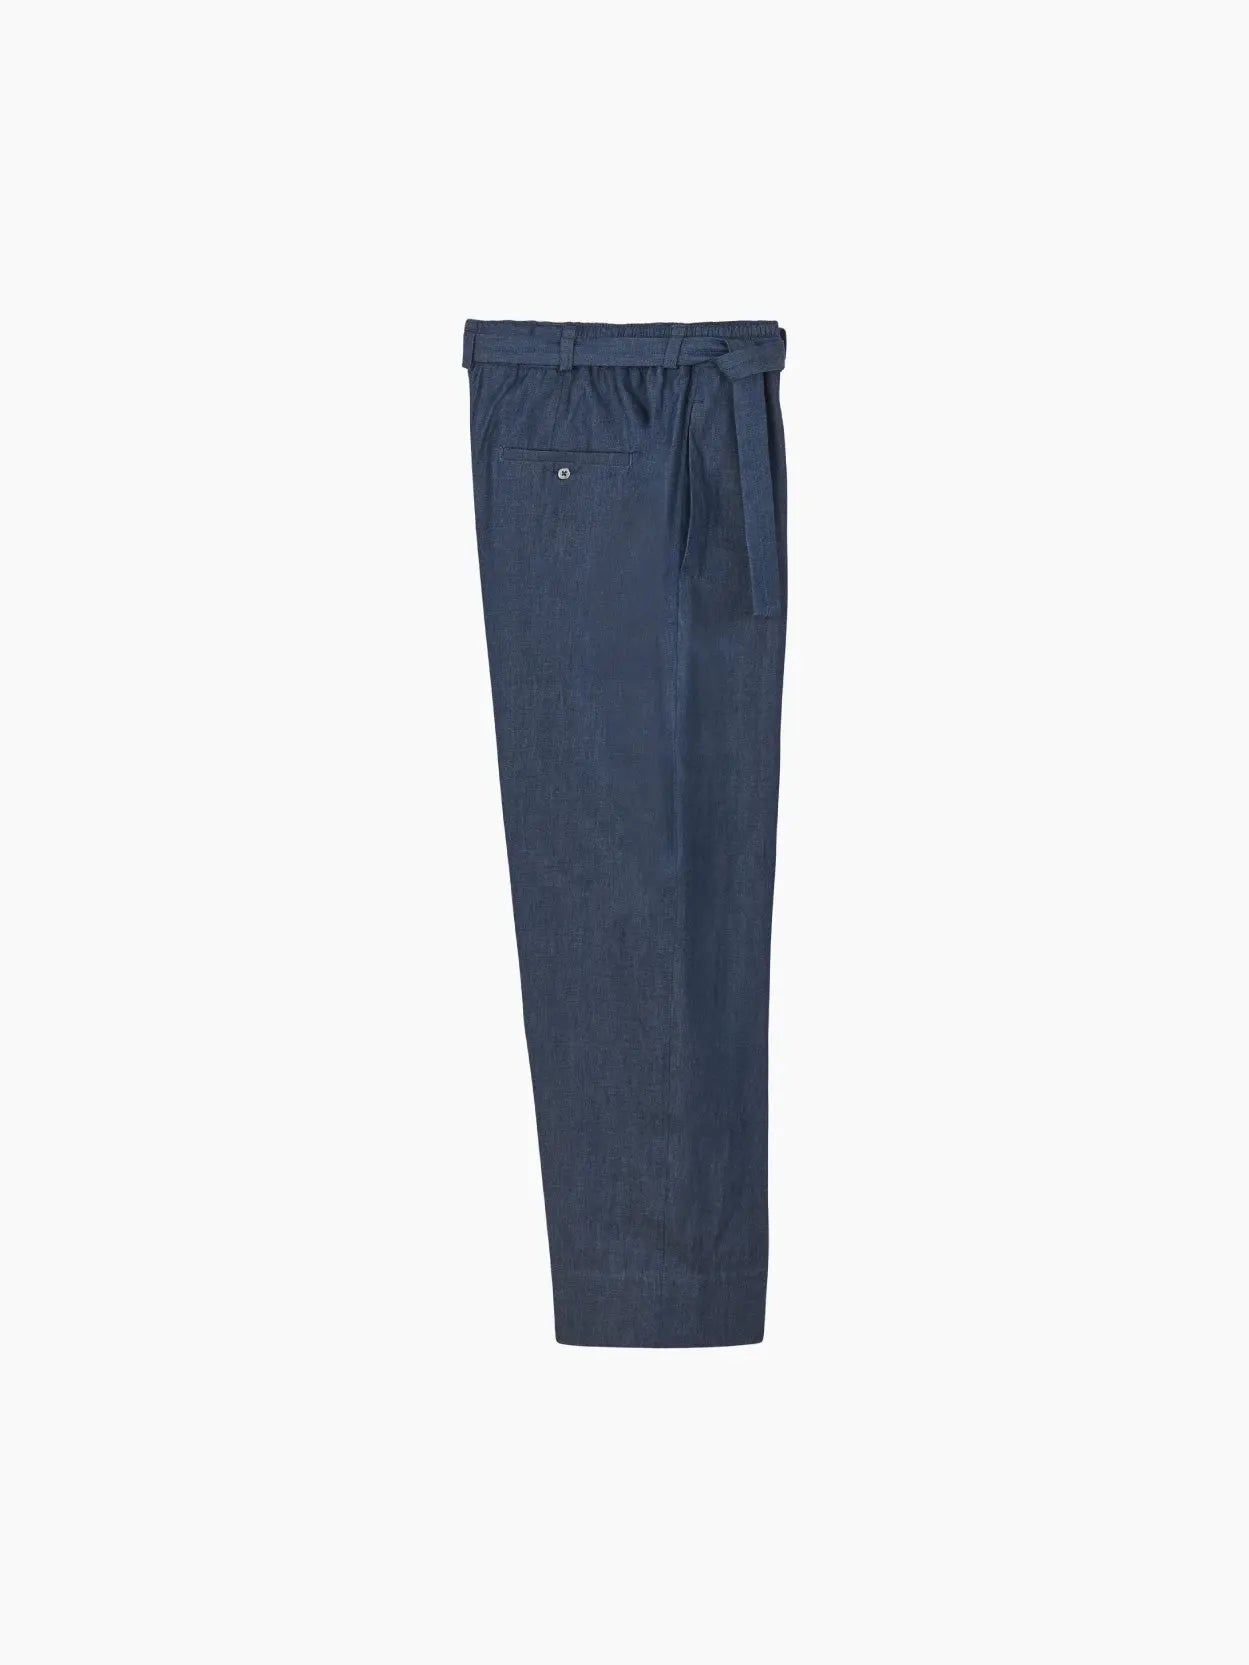 A pair of loose-fit, high-waisted navy blue trousers made from a lightweight fabric. The trousers feature a drawstring waistband and a single back pocket with a button closure. This stylish piece, Taurus Pants Denim by Jan Machenhauer, is available at the Bassal Store in Barcelona, shown from the side on a plain white background.